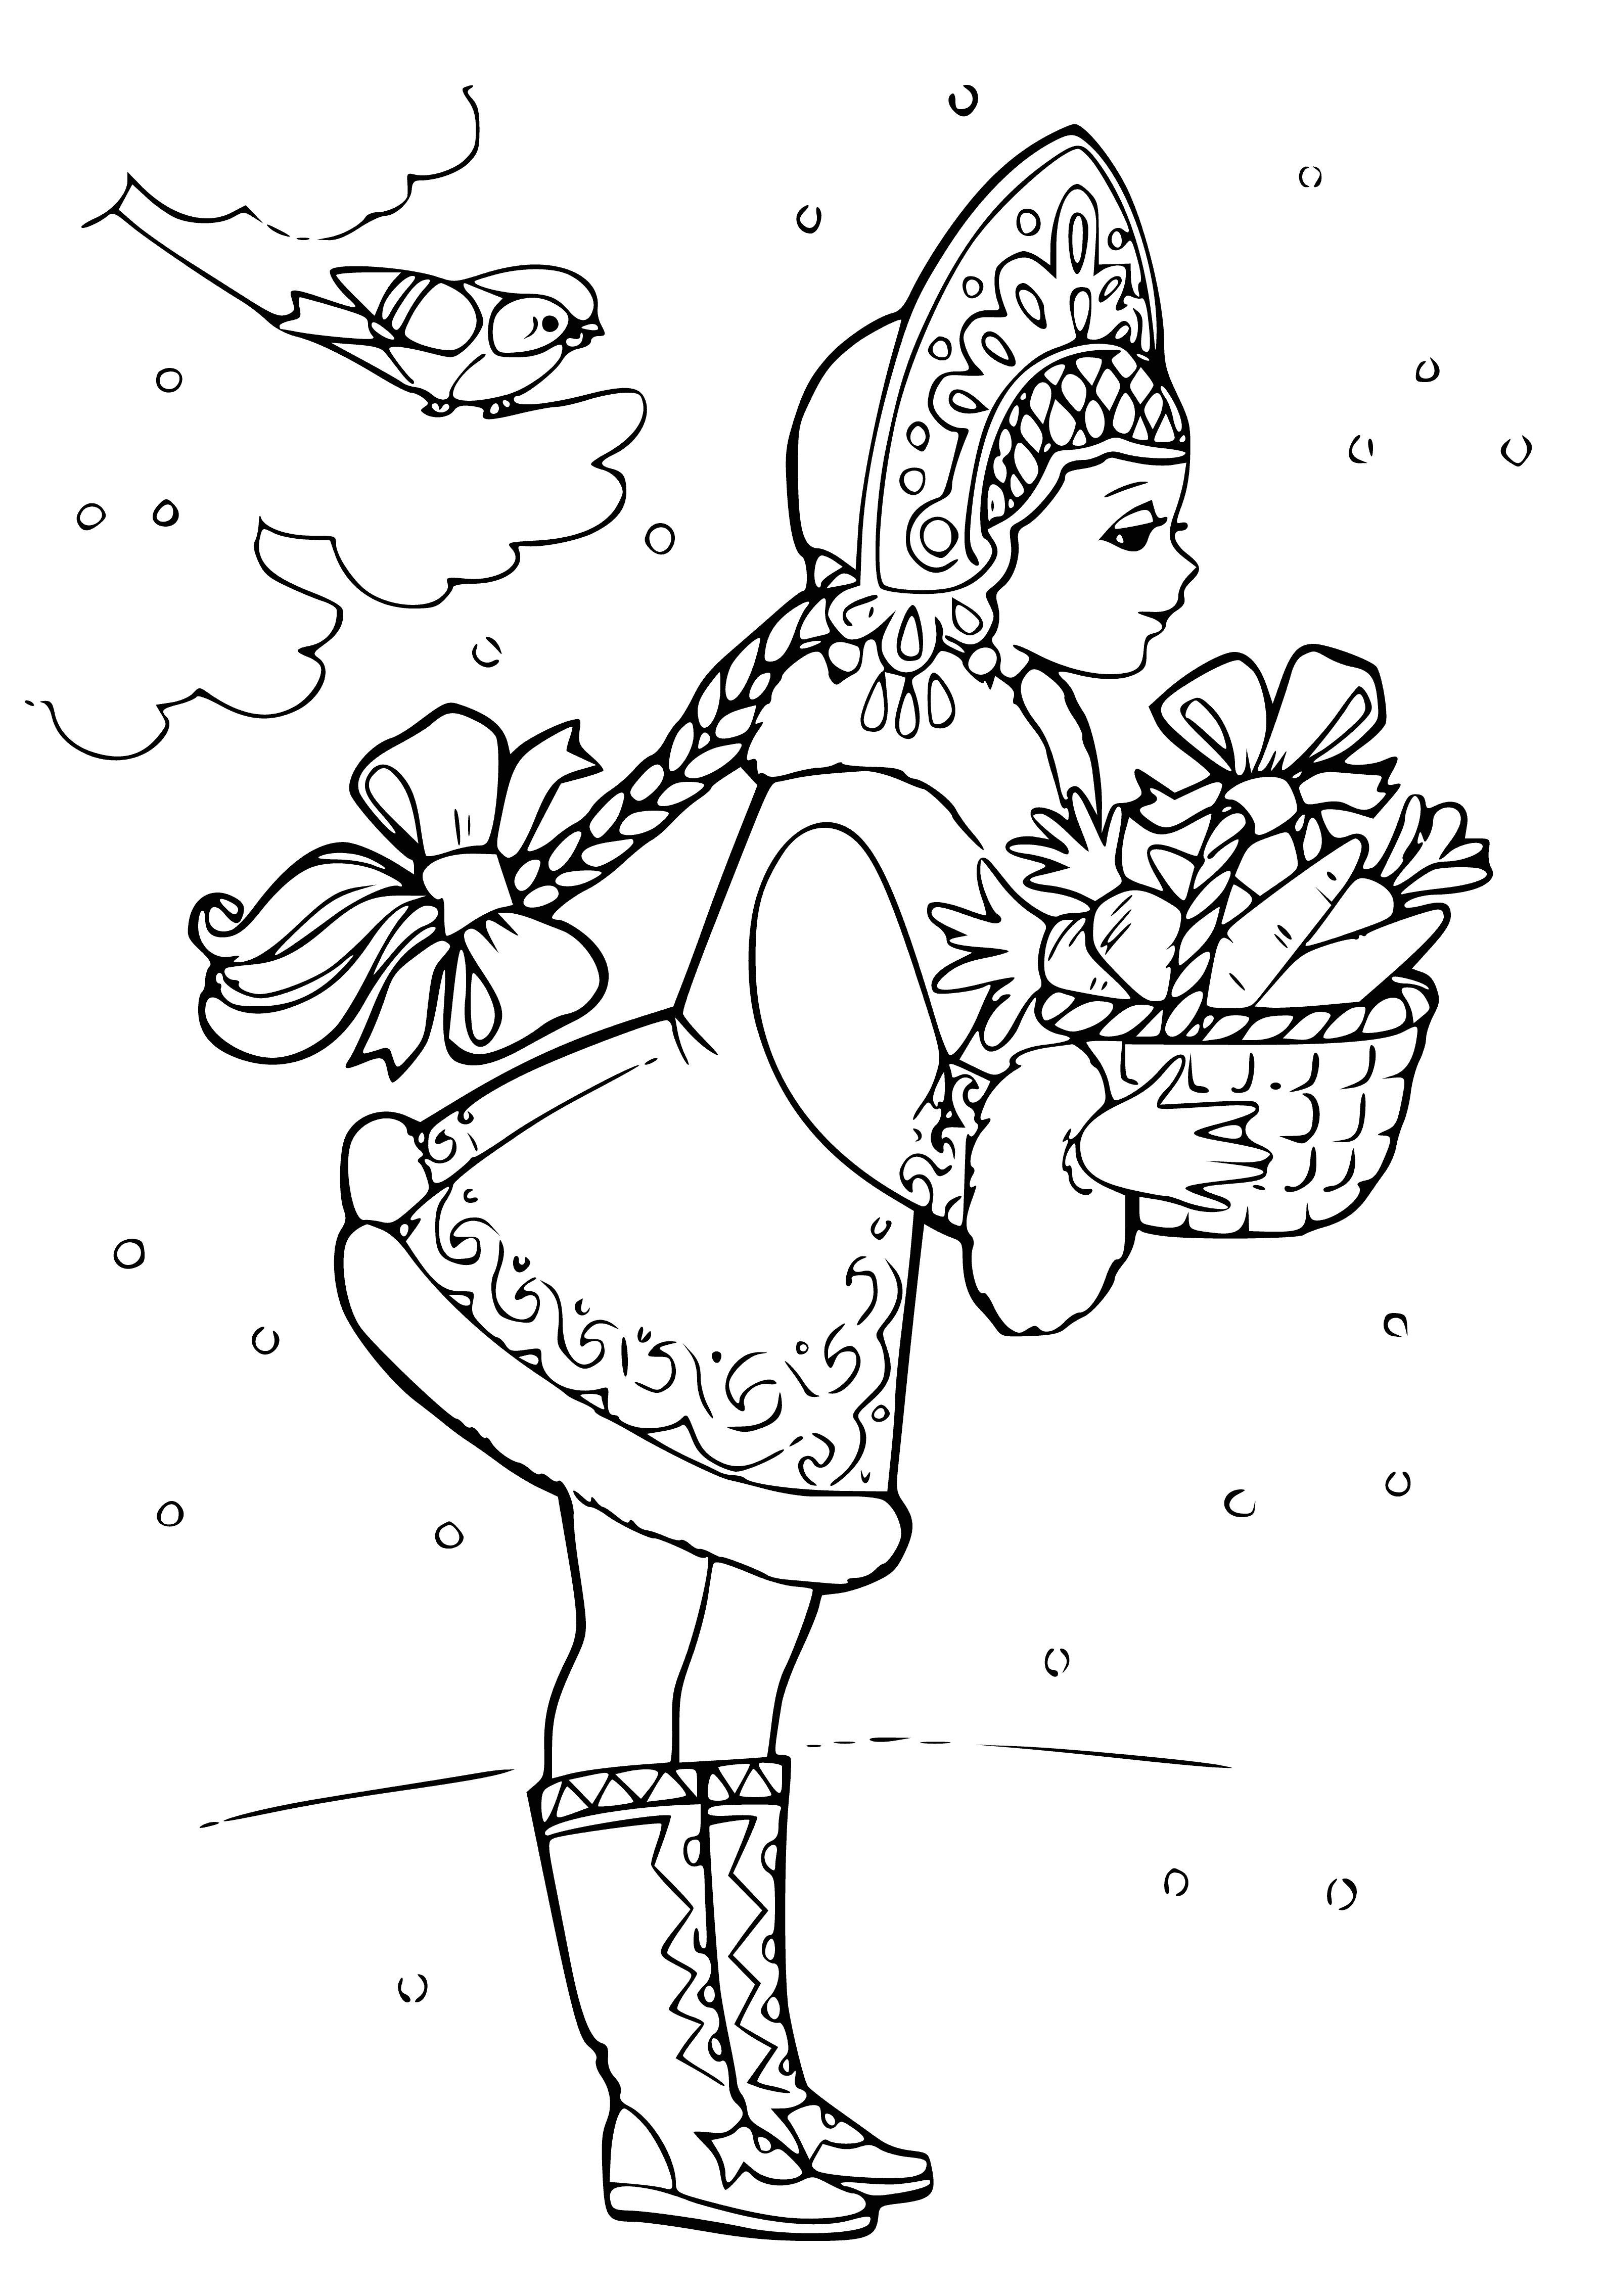 coloring page: Girl stands in snow with a scarf, dress & basket.  #wintervibes